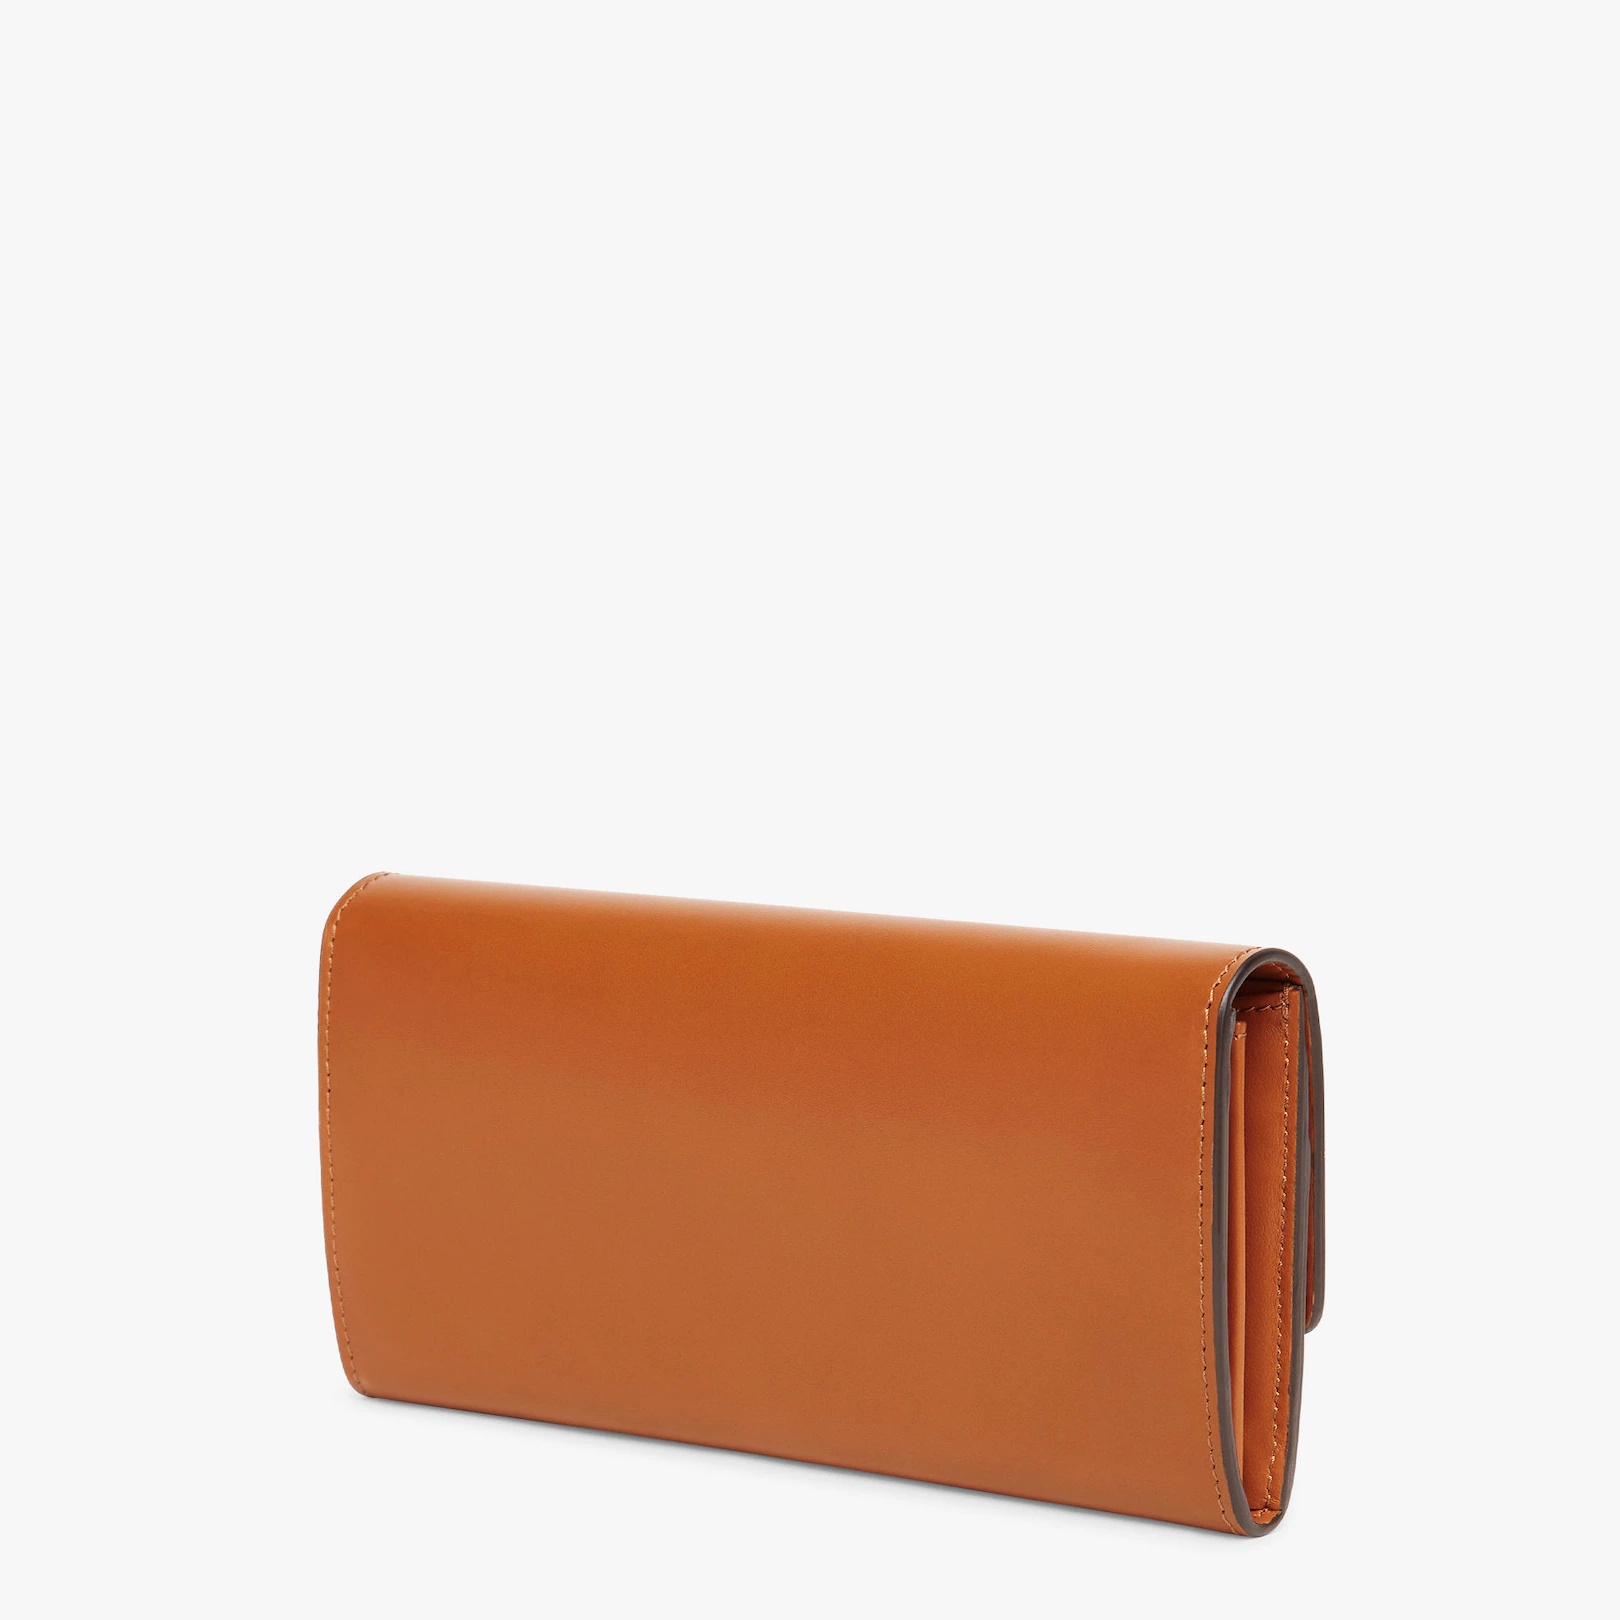 Brown leather wallet - 2